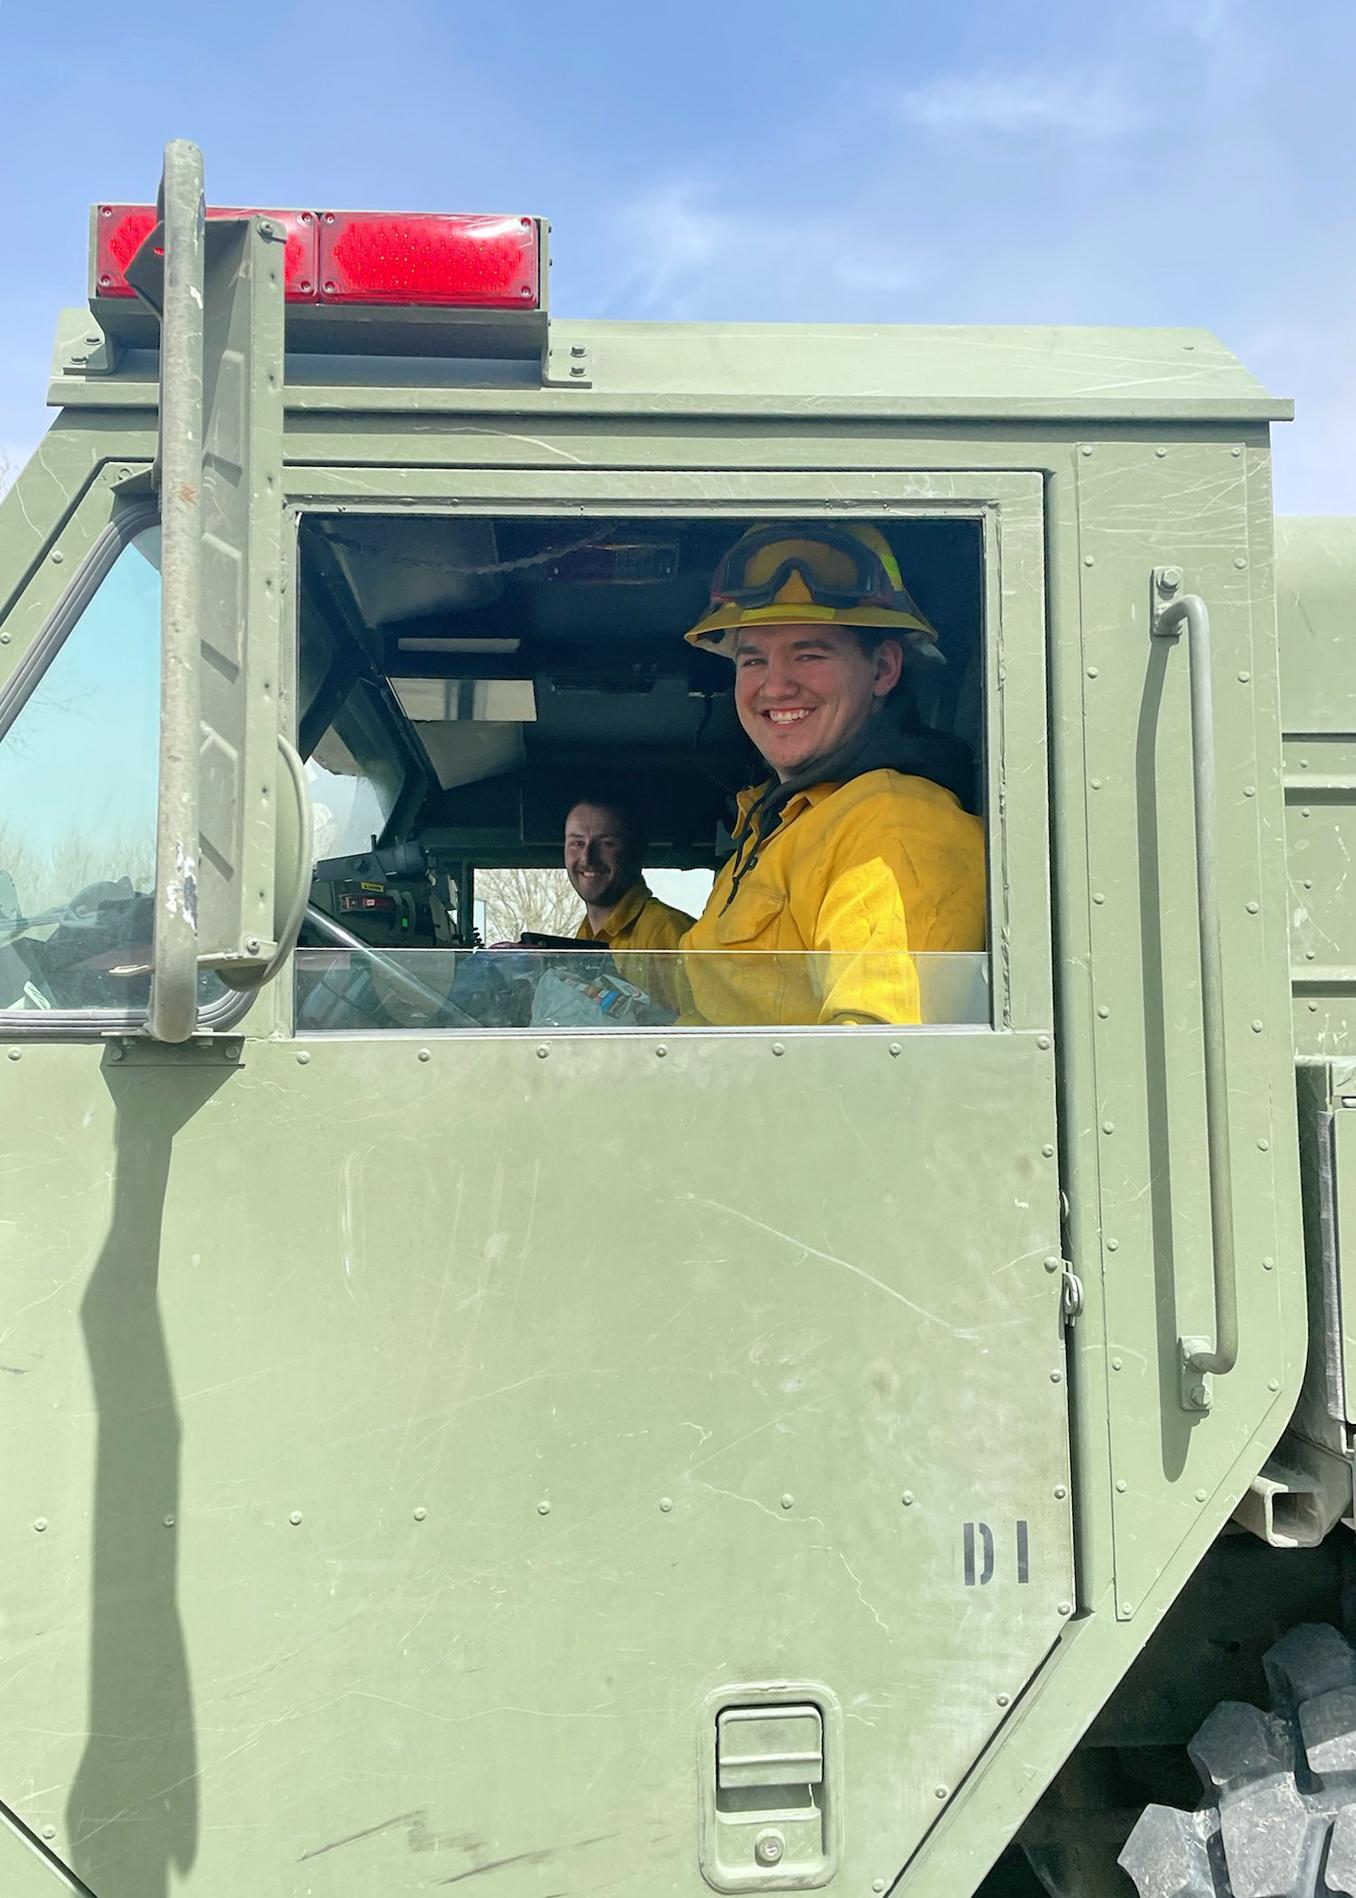 Spc. Seth Miller (foreground) and Staff Sgt. Gage Boyce (background) pause for a photo while operating the HEMTT-Based Water Tanker (HEWATT) near Cambridge today, where they have supported wildfire response the past four days. Boyce serves with the 281st